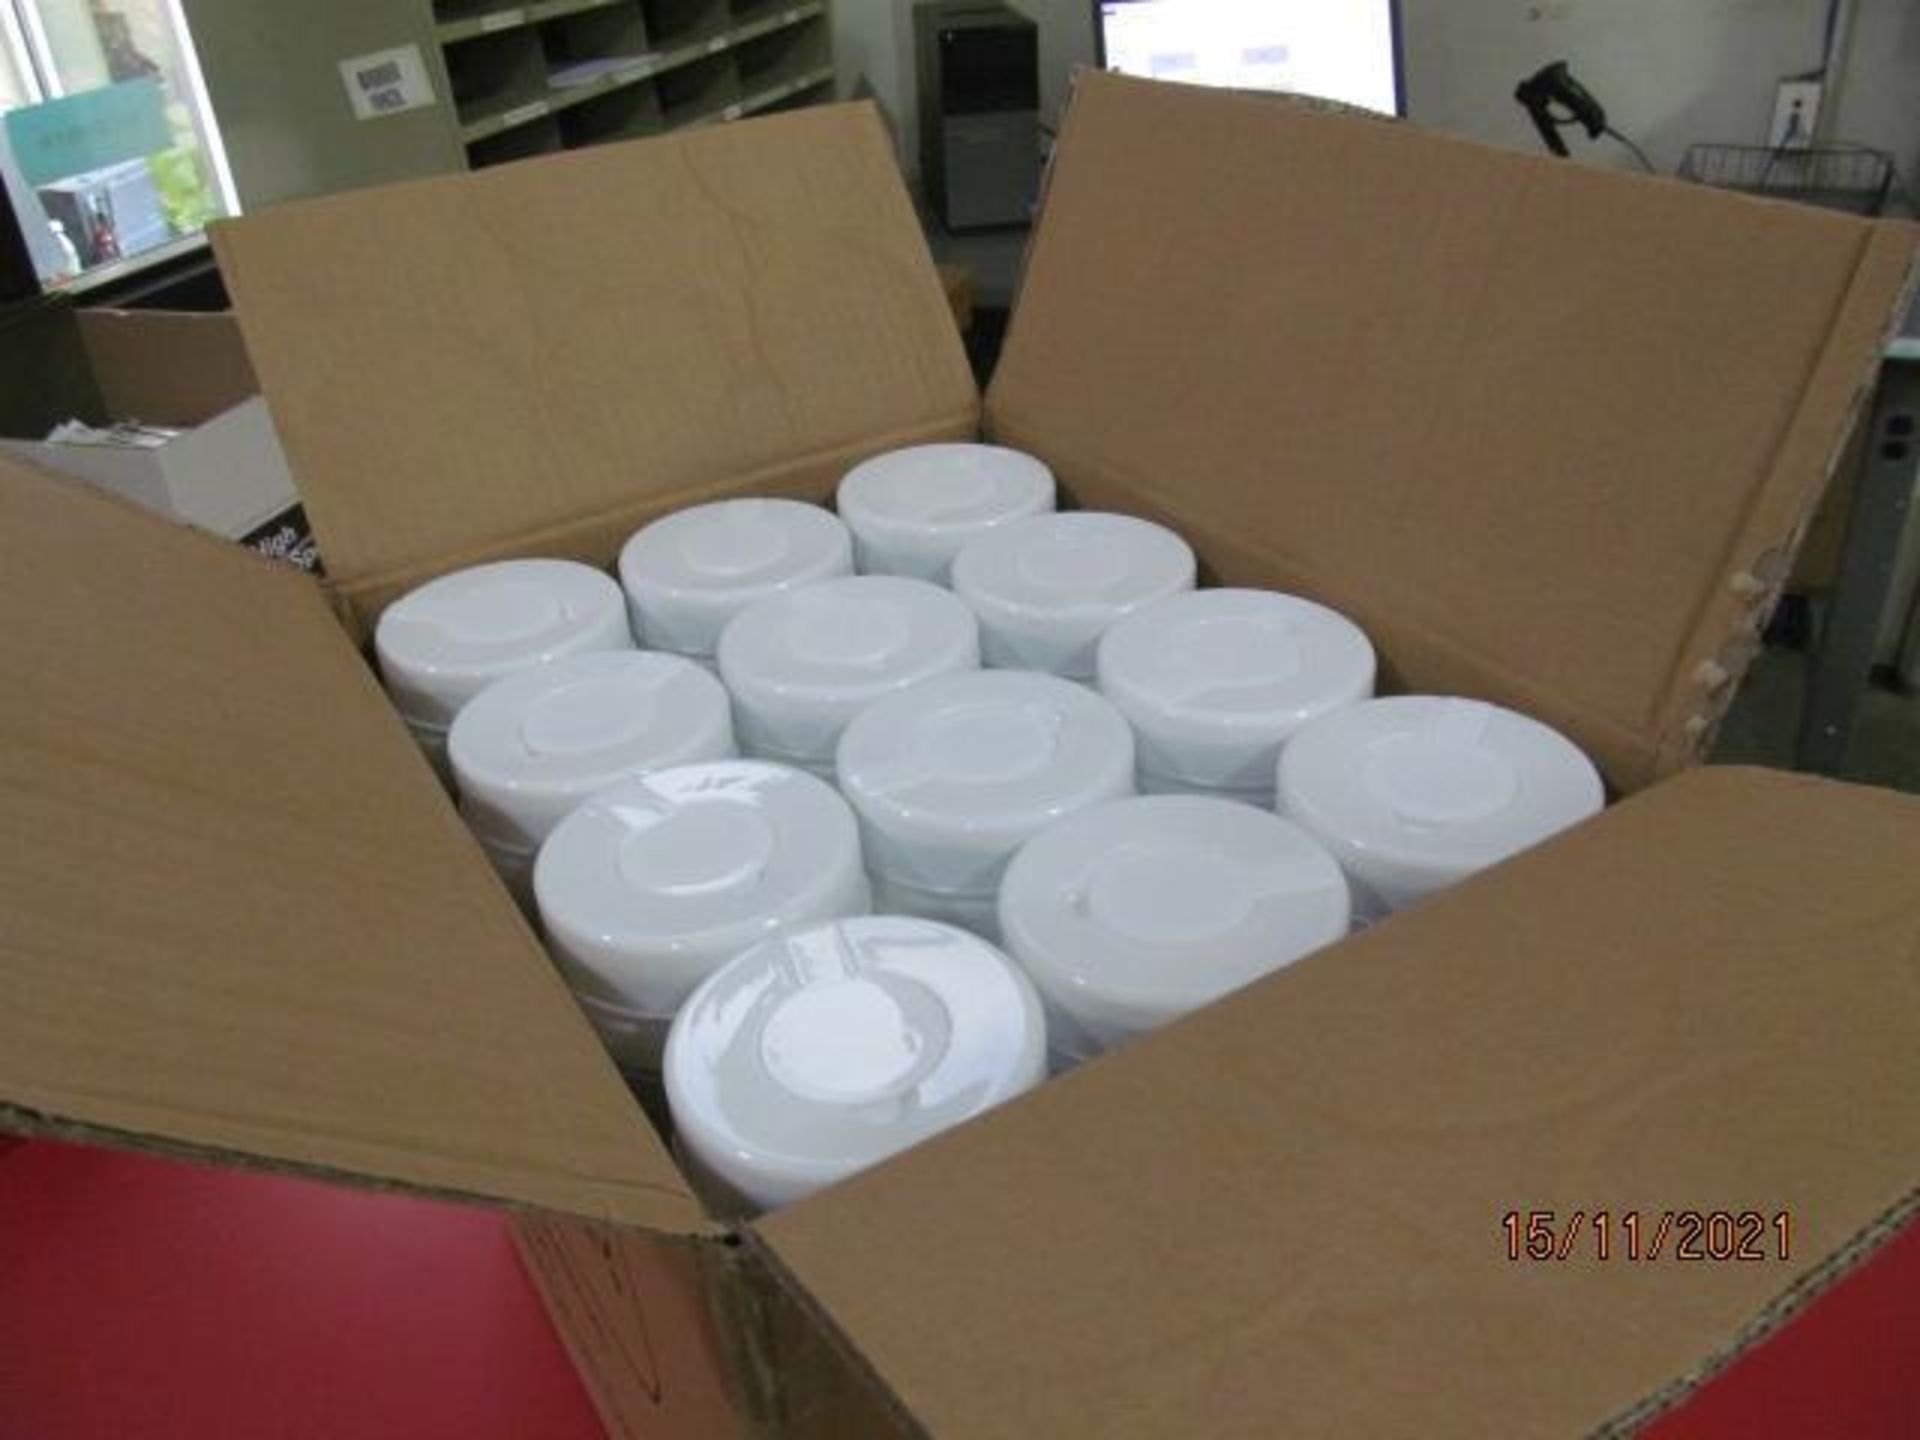 Lot of Waxman Kleen Freak Sanitizing Wipes consisting of 3,240 packages on 5 pallets. Each package c - Image 5 of 11